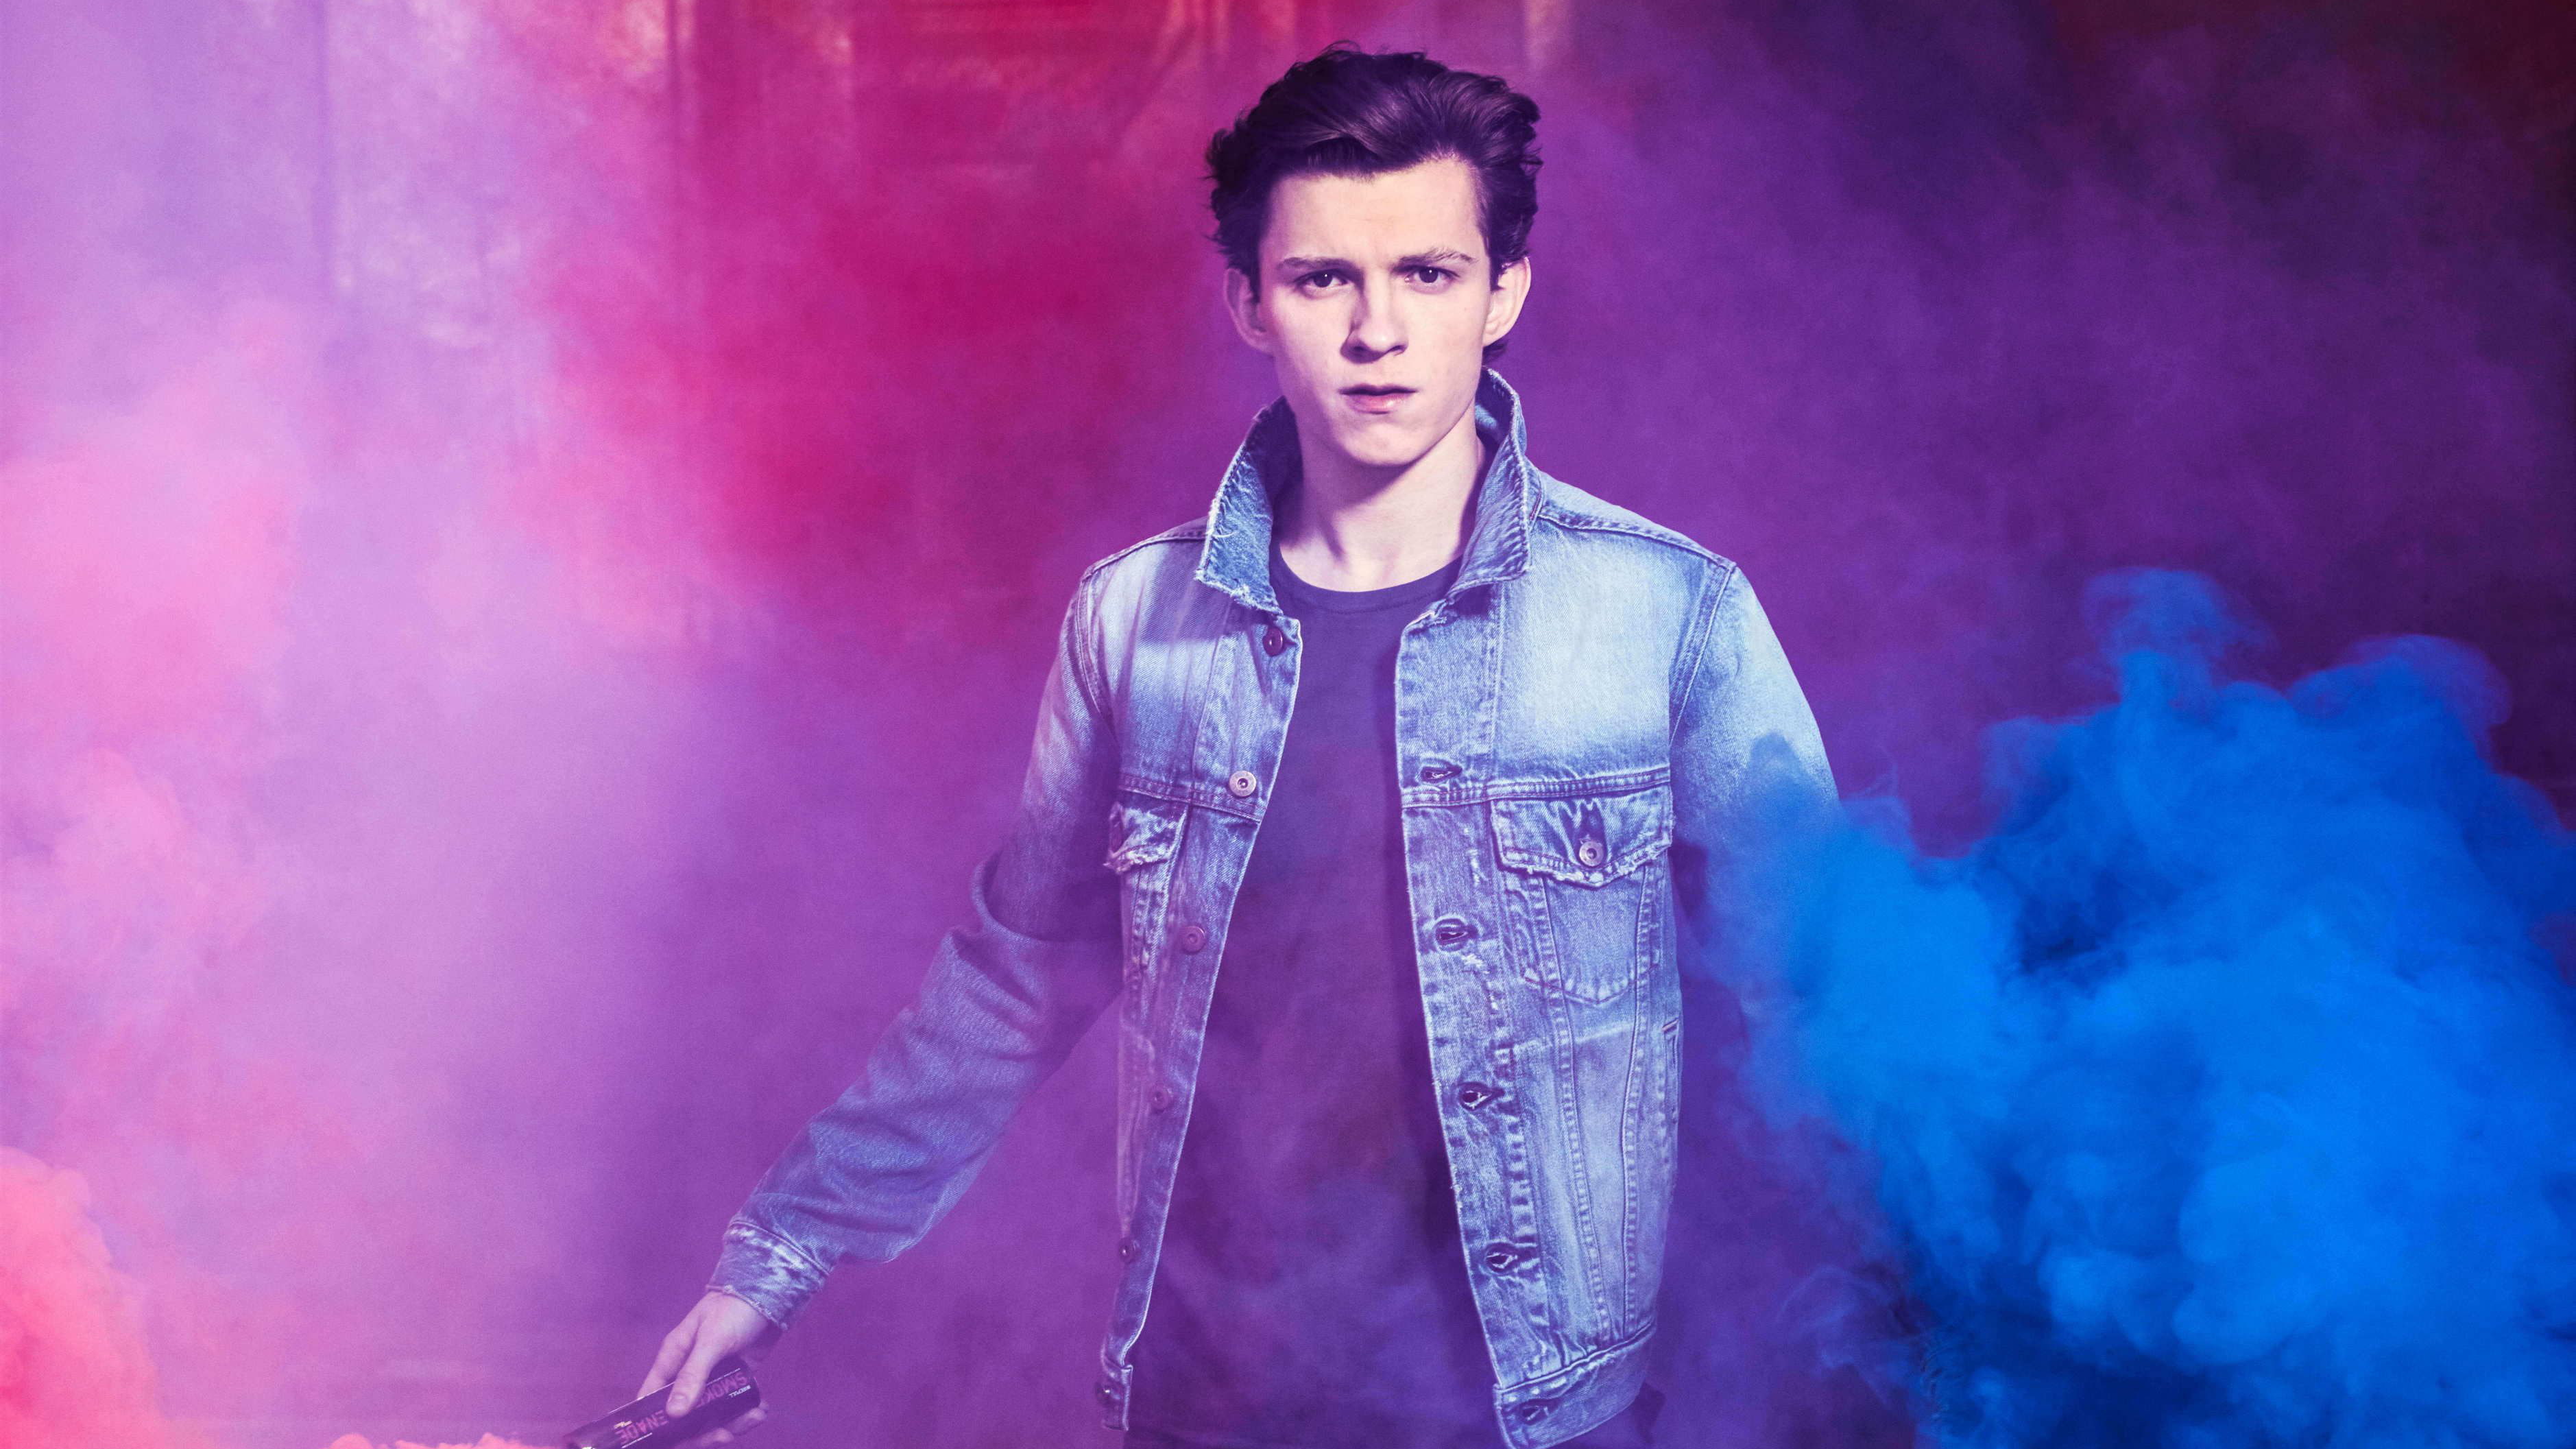 tom holland, male celebrities, boys, hd, 4k, smoke - physical structure